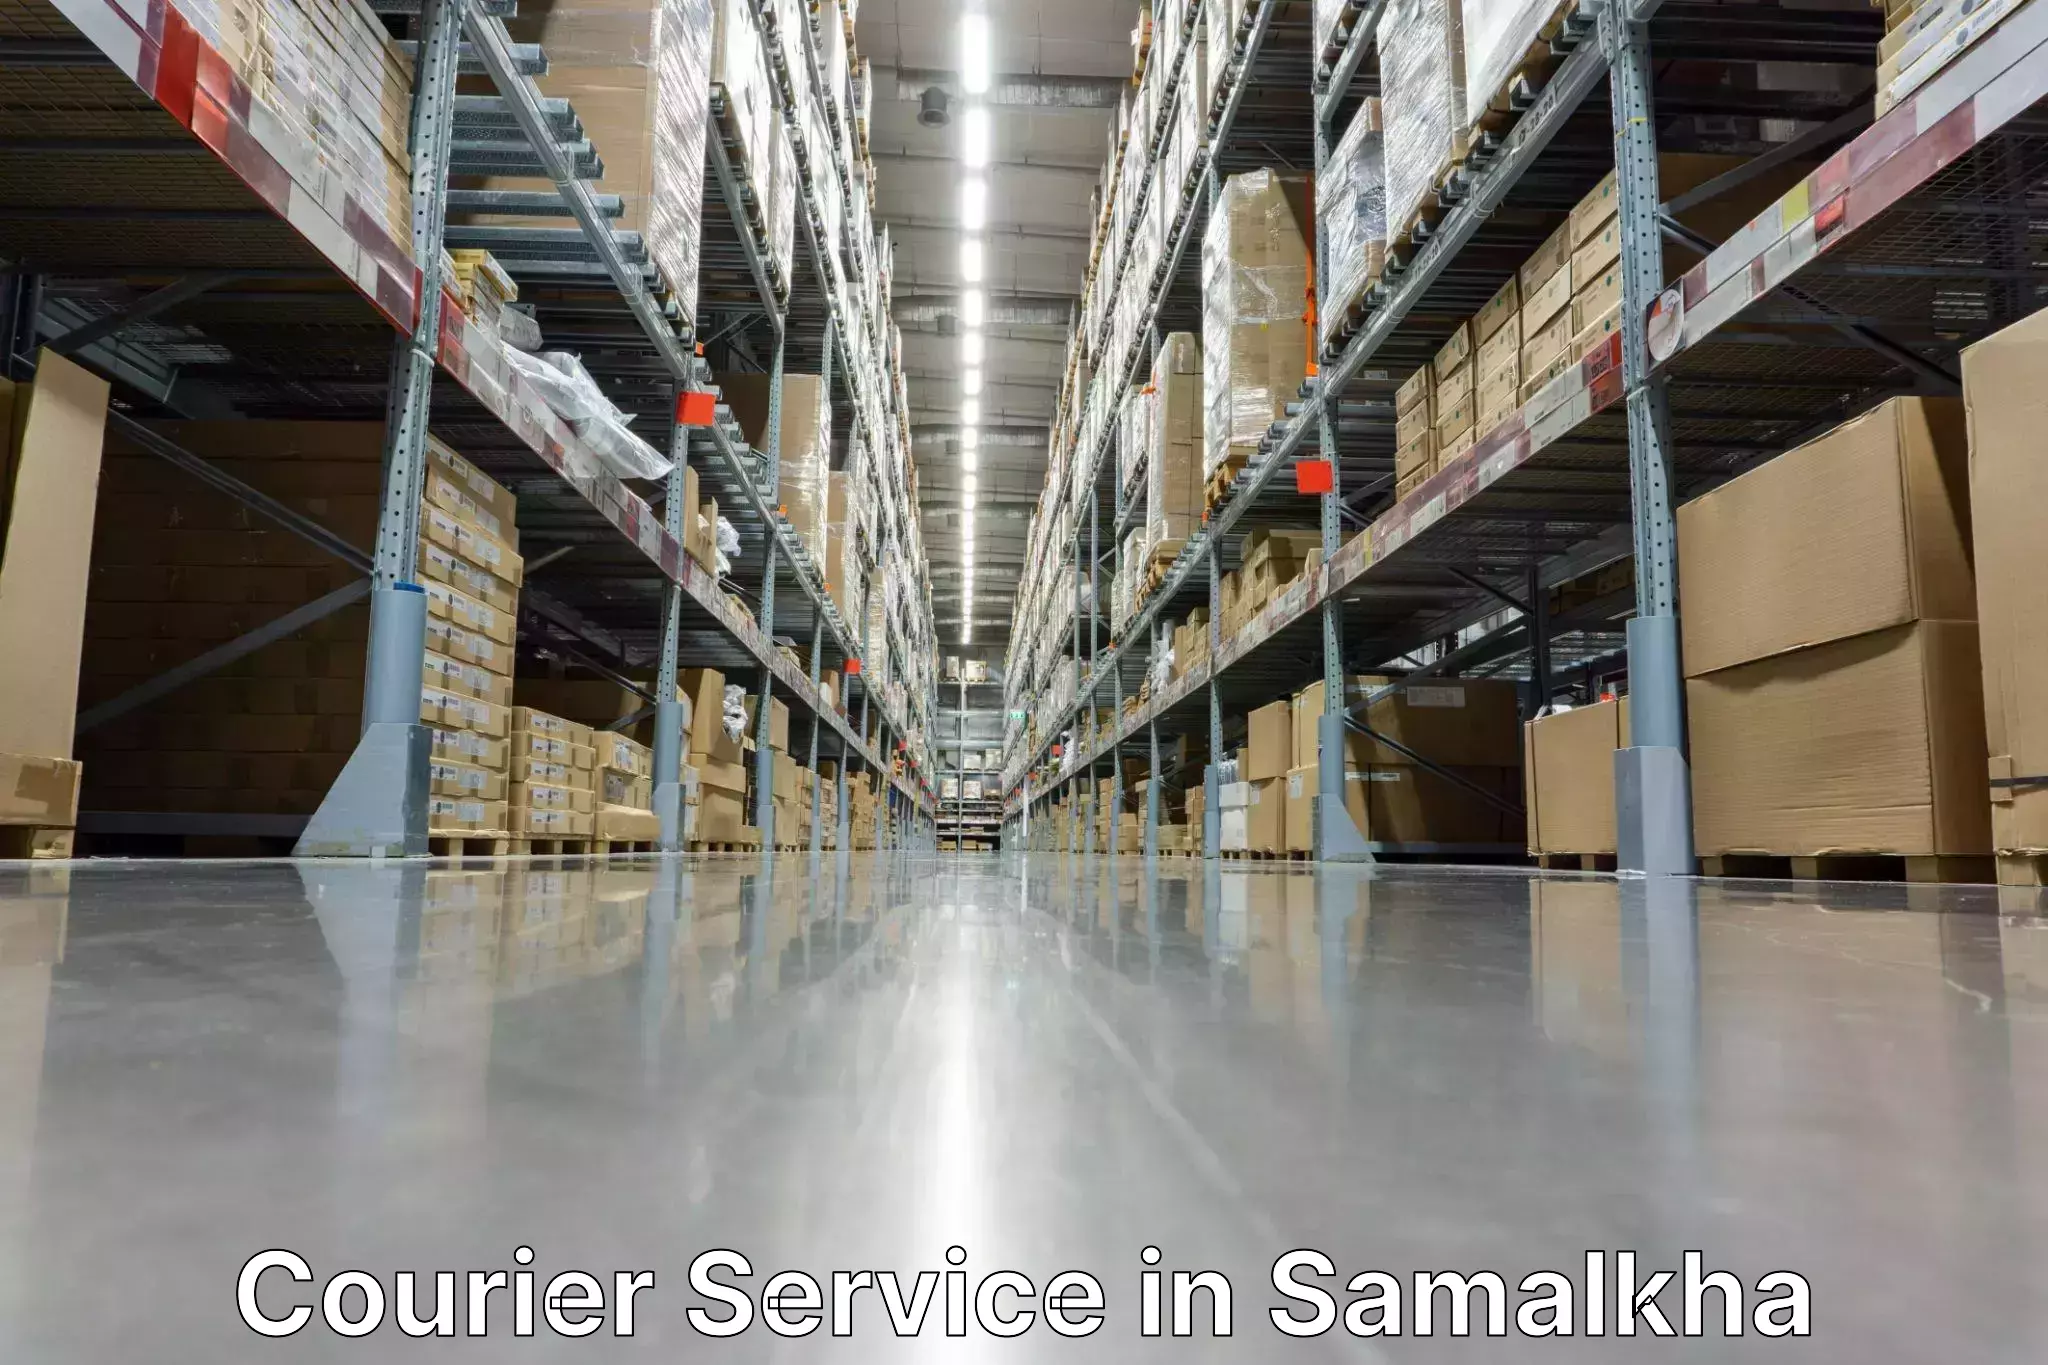 Customer-friendly courier services in Samalkha